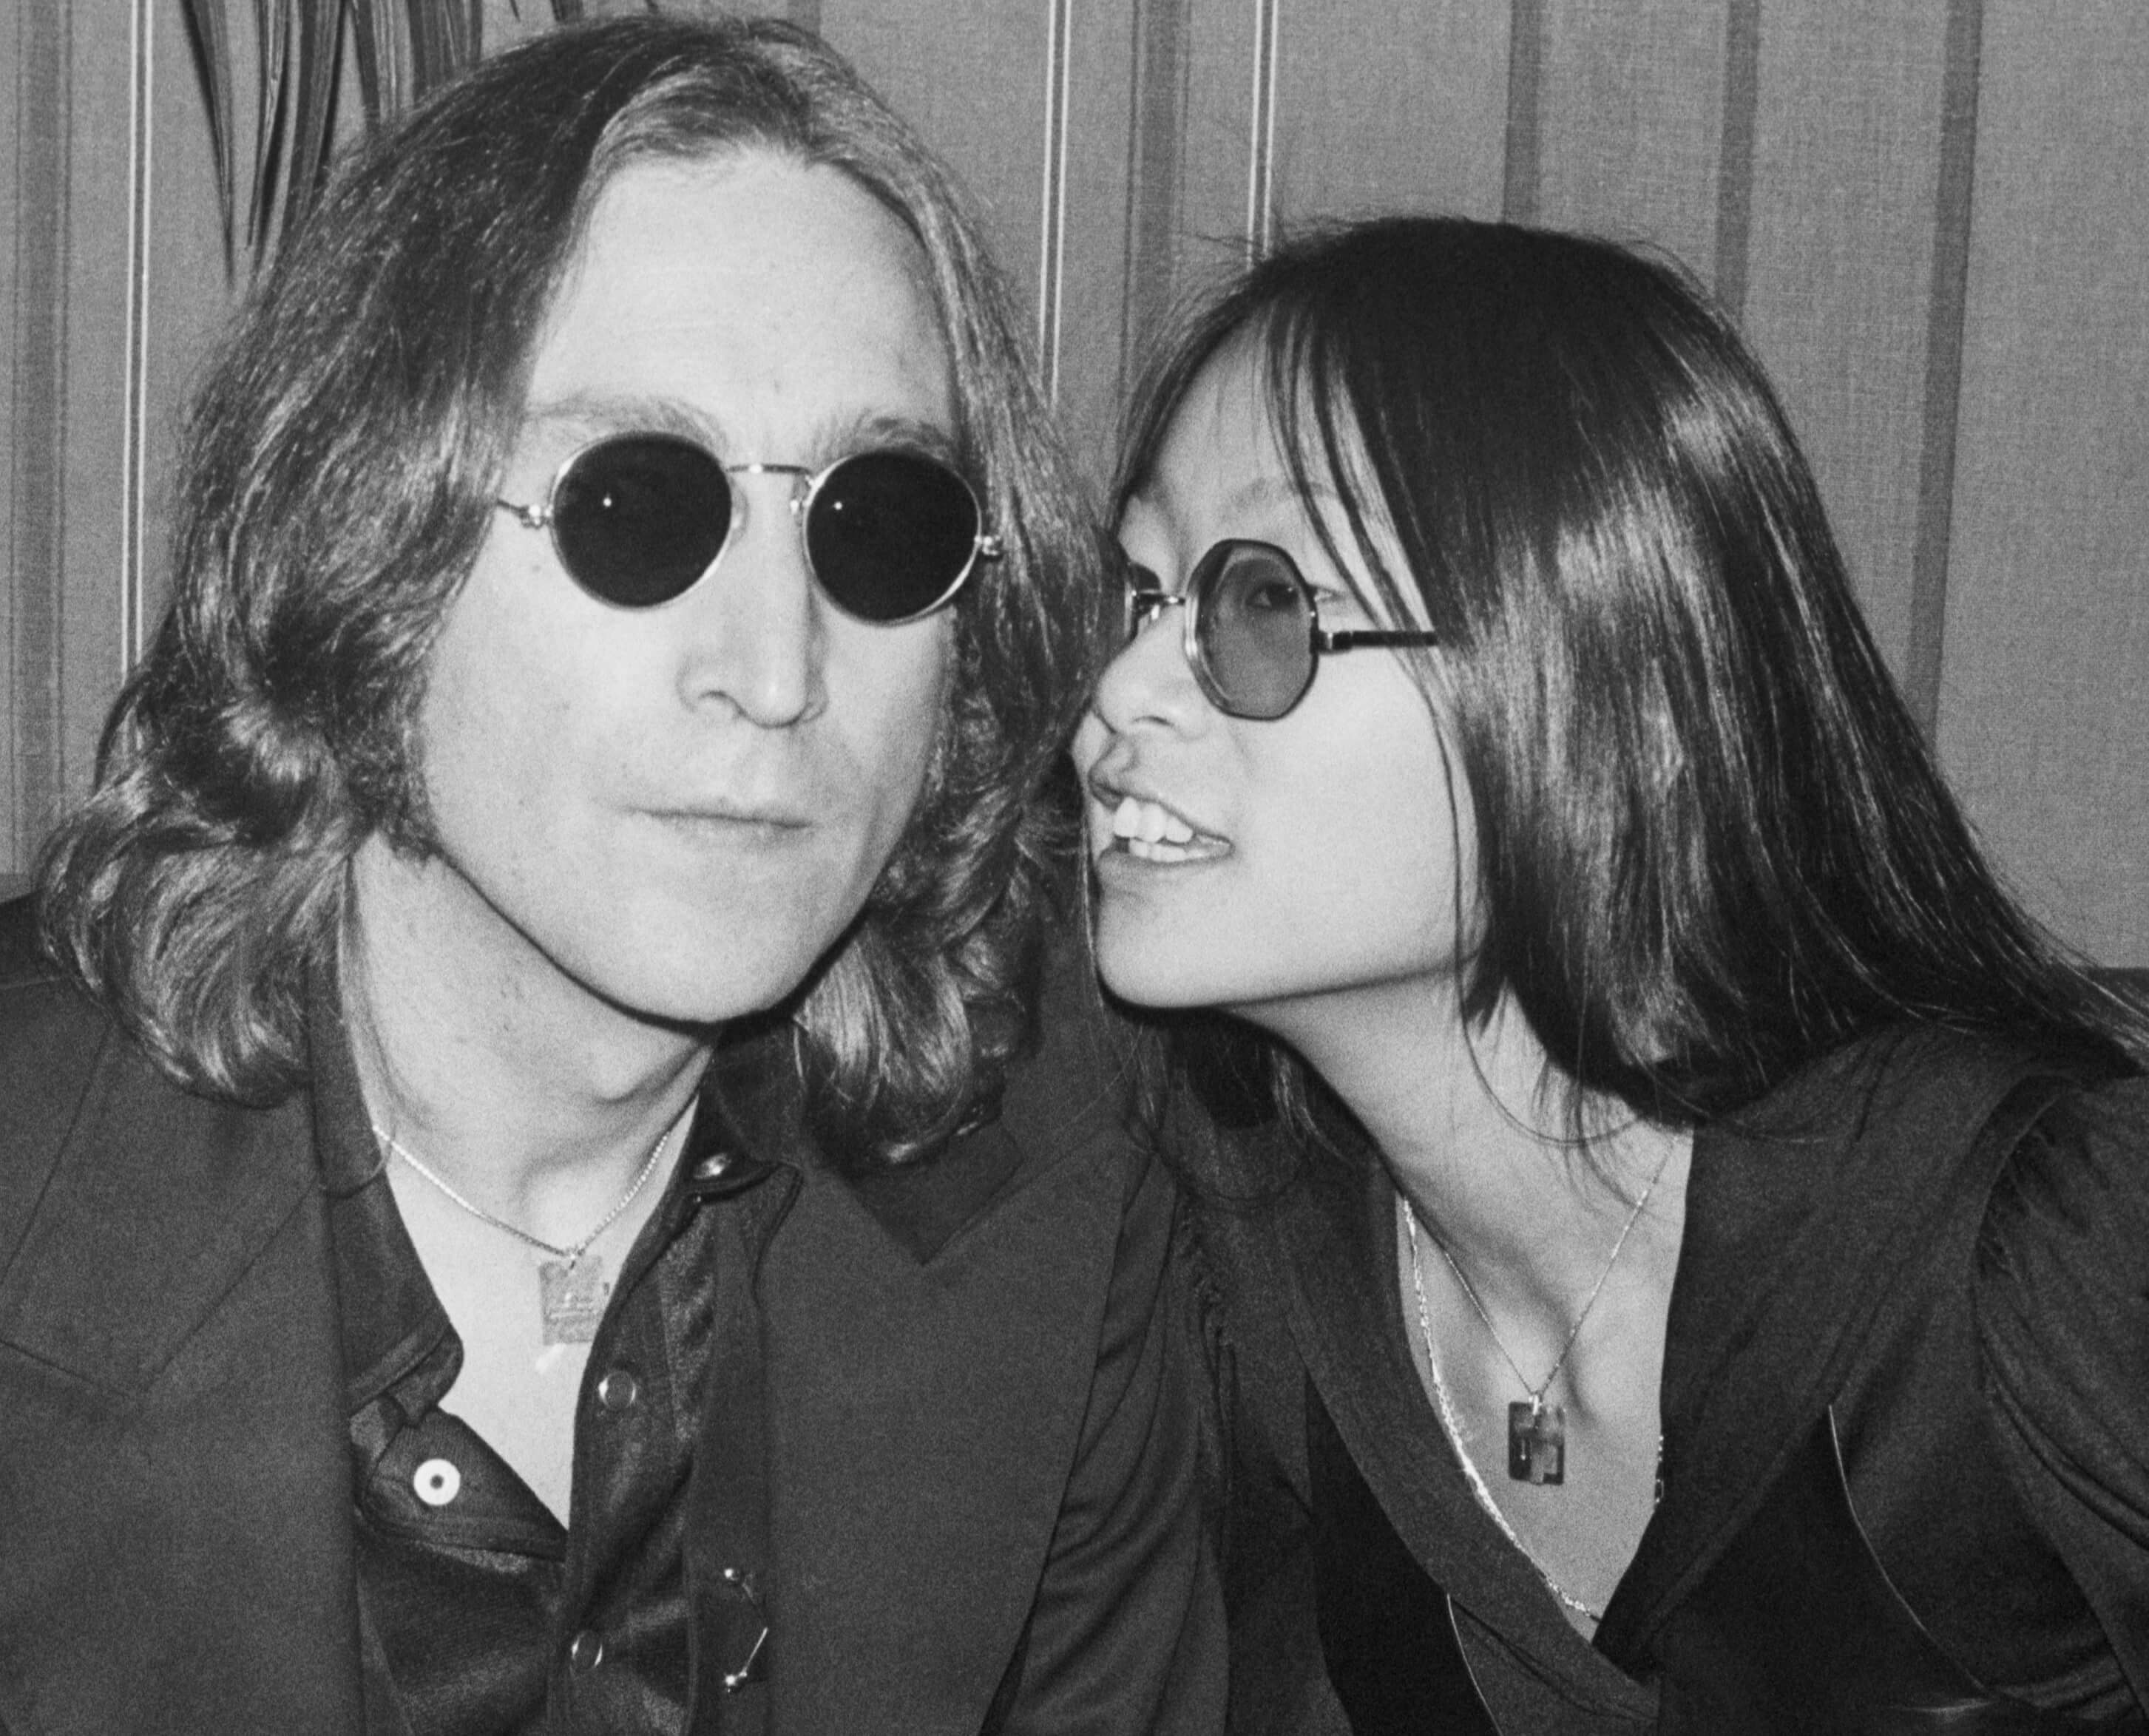 John Lennon and May Pang in black-and-white